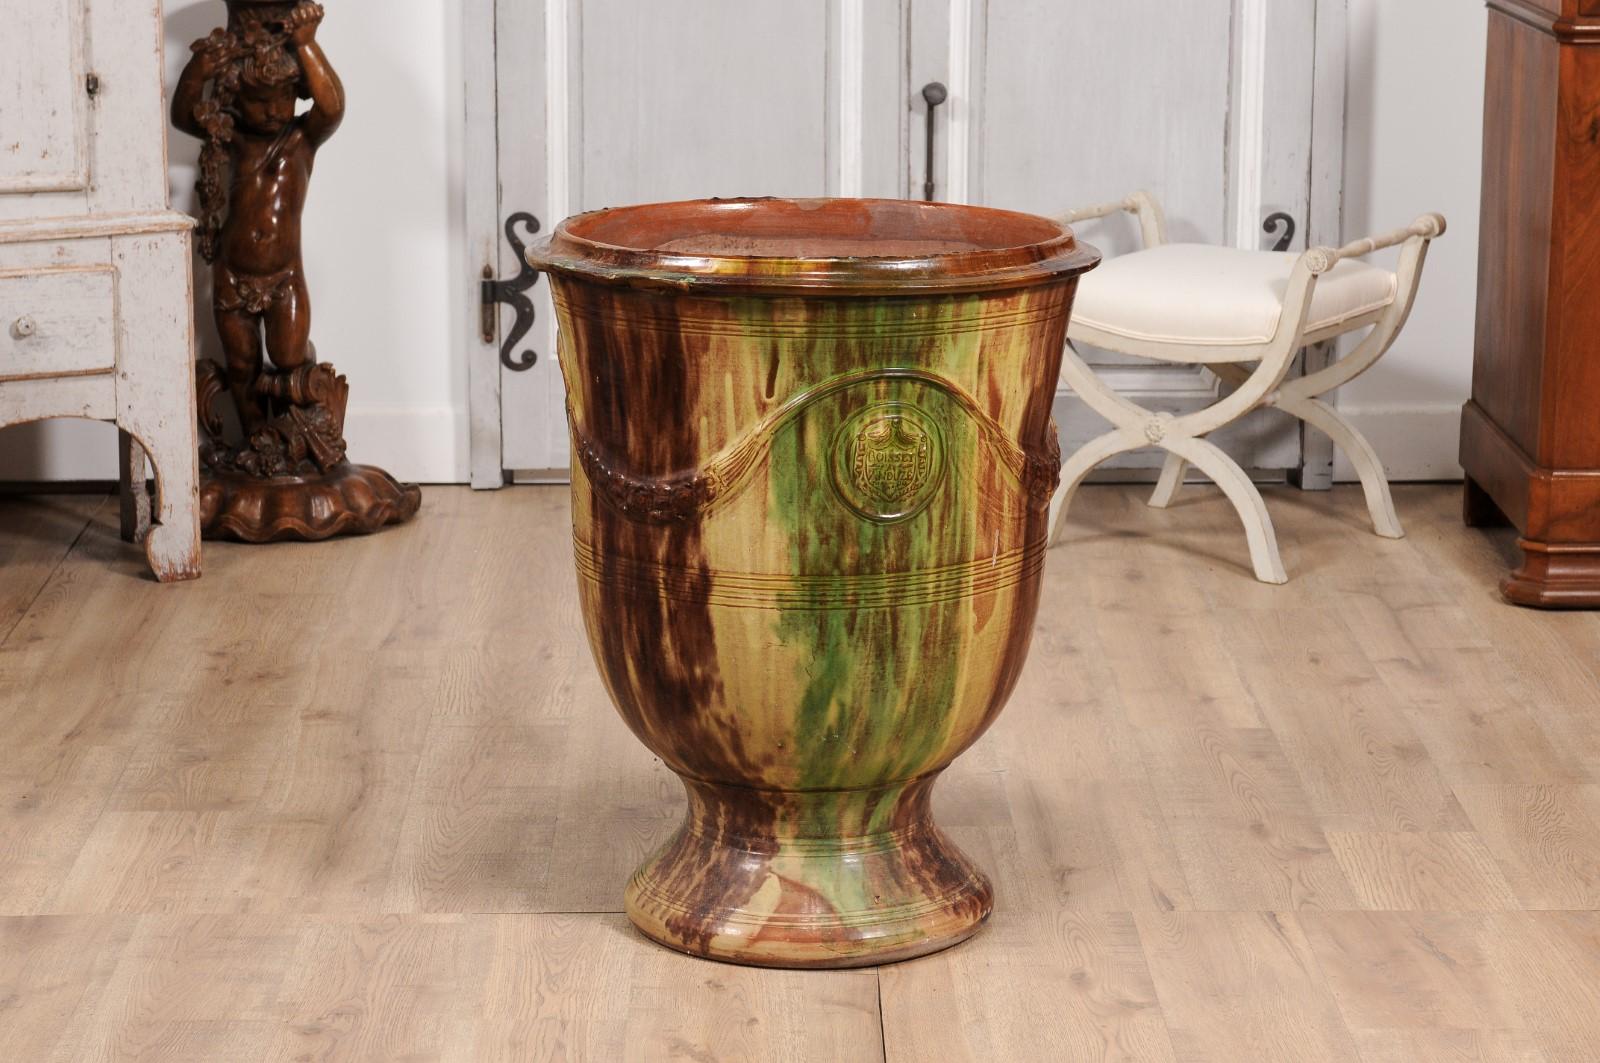 Glazed Large French Boisset Anduze Jar with Brown, Green Glaze and Swags, 21st Century For Sale